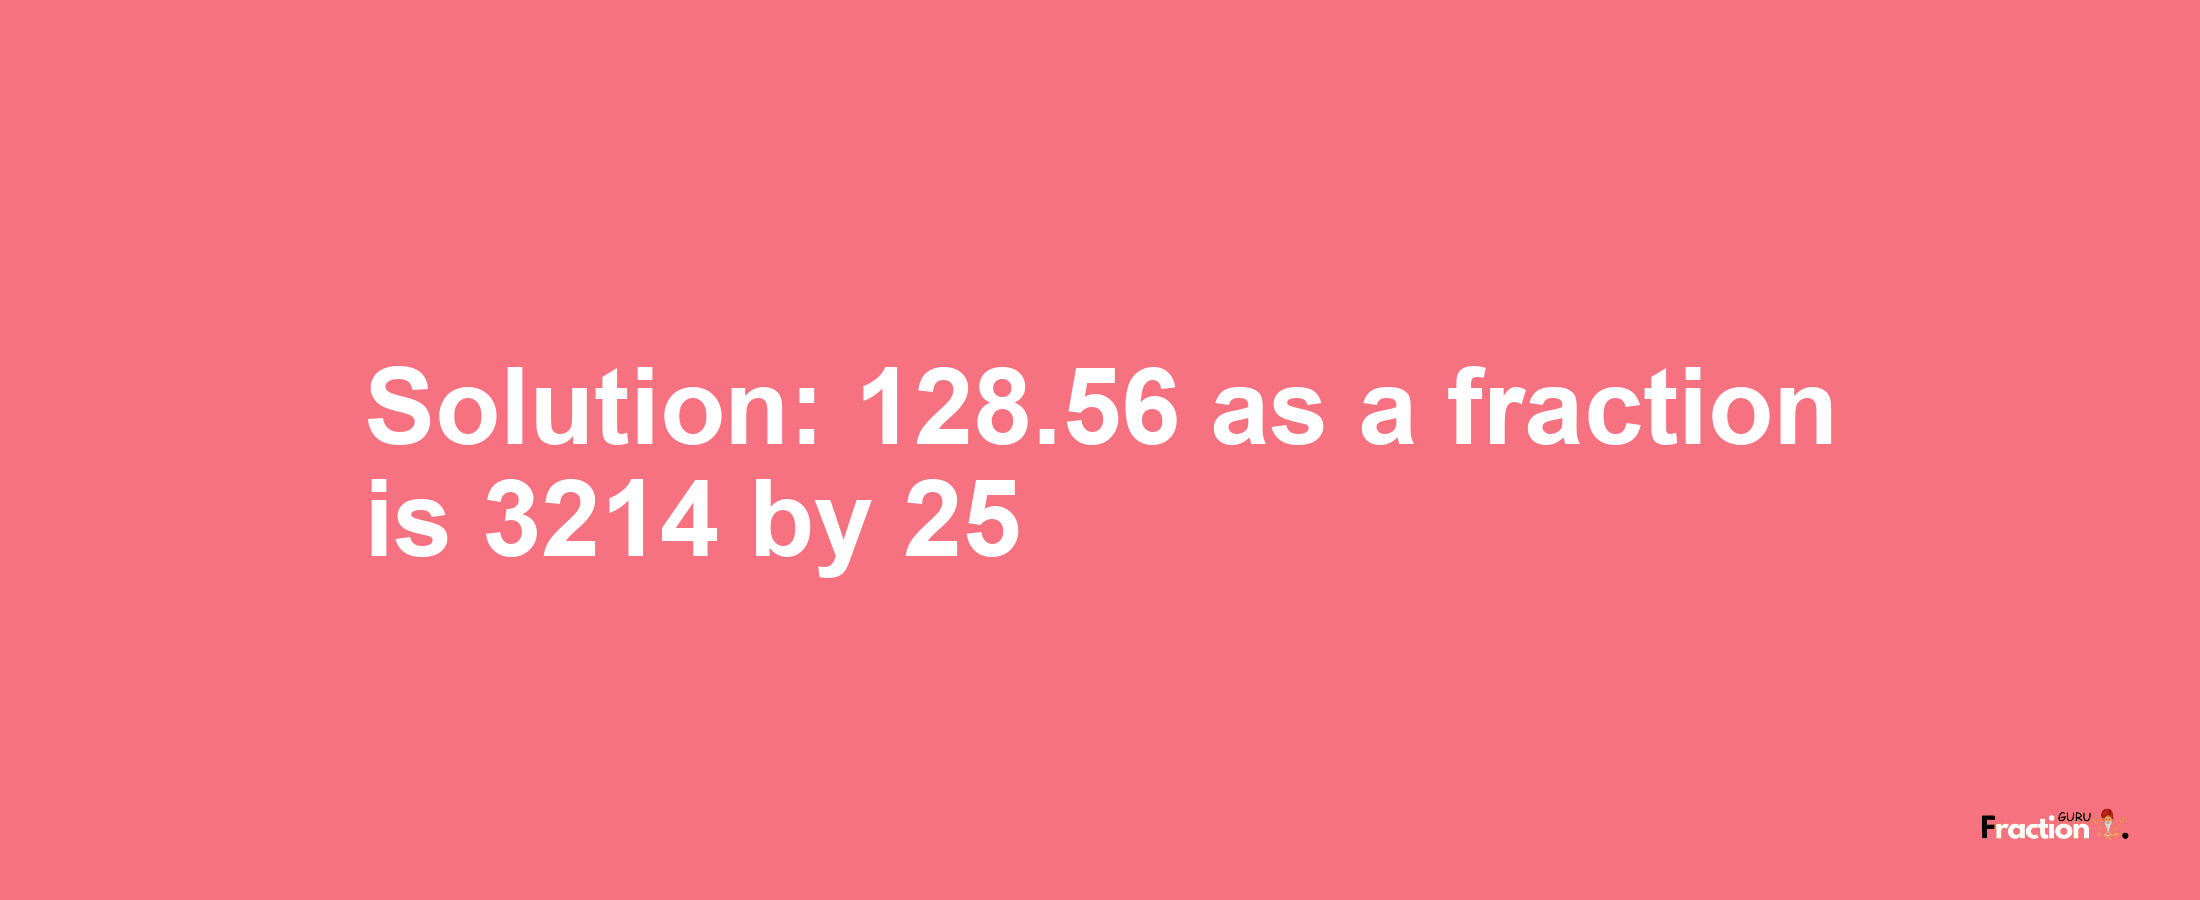 Solution:128.56 as a fraction is 3214/25